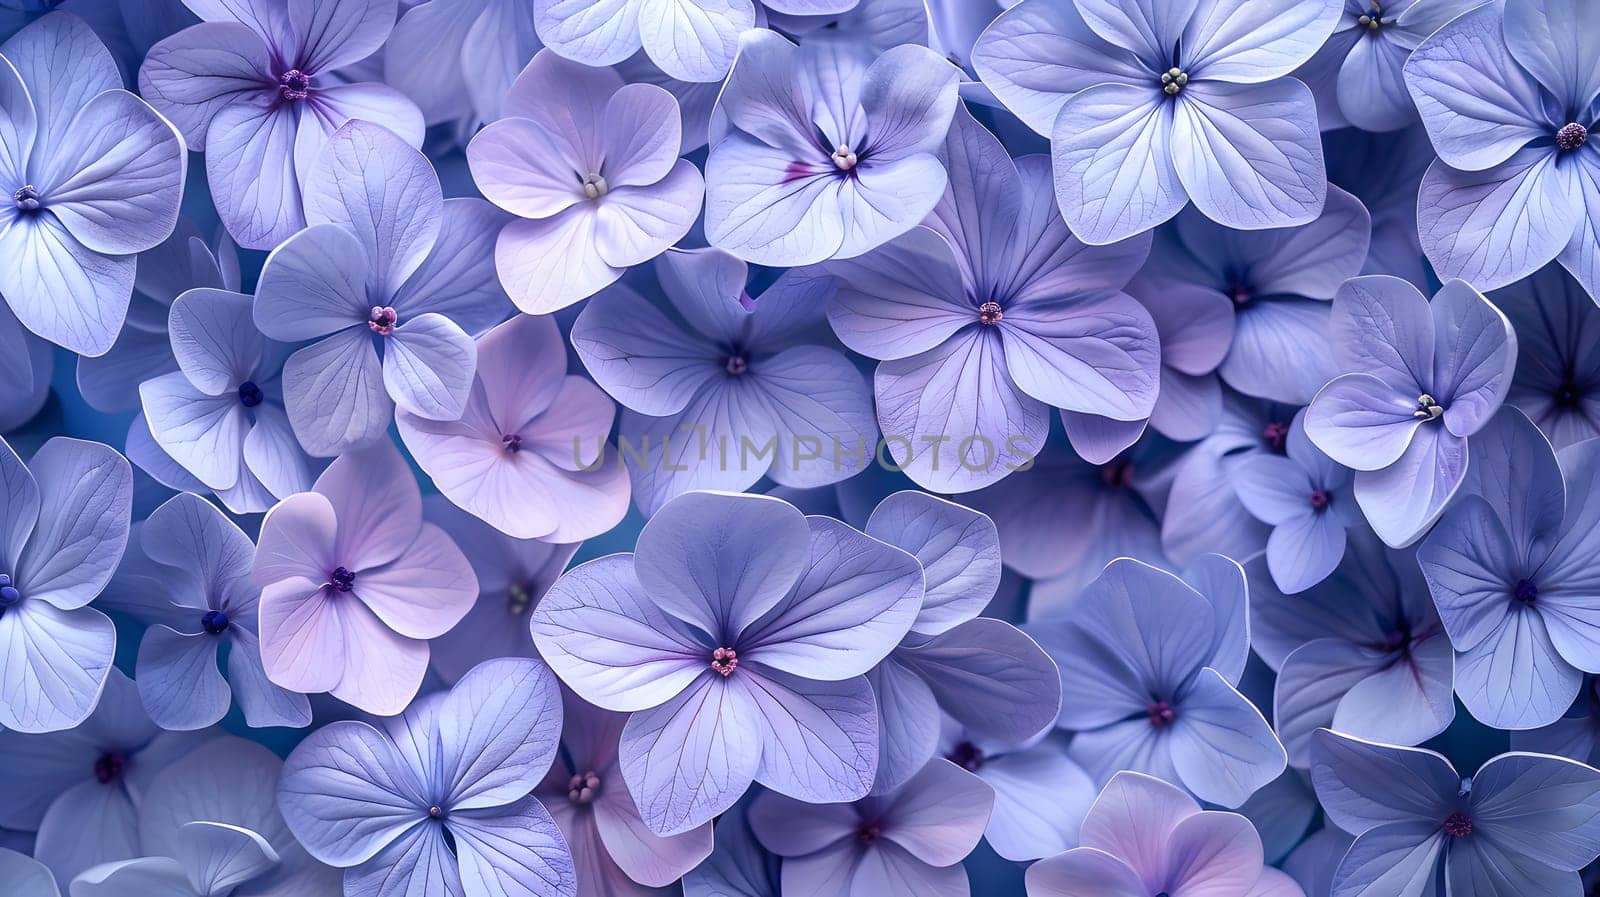 Vibrant purple flowers on azure groundcover, closeup shot by Nadtochiy